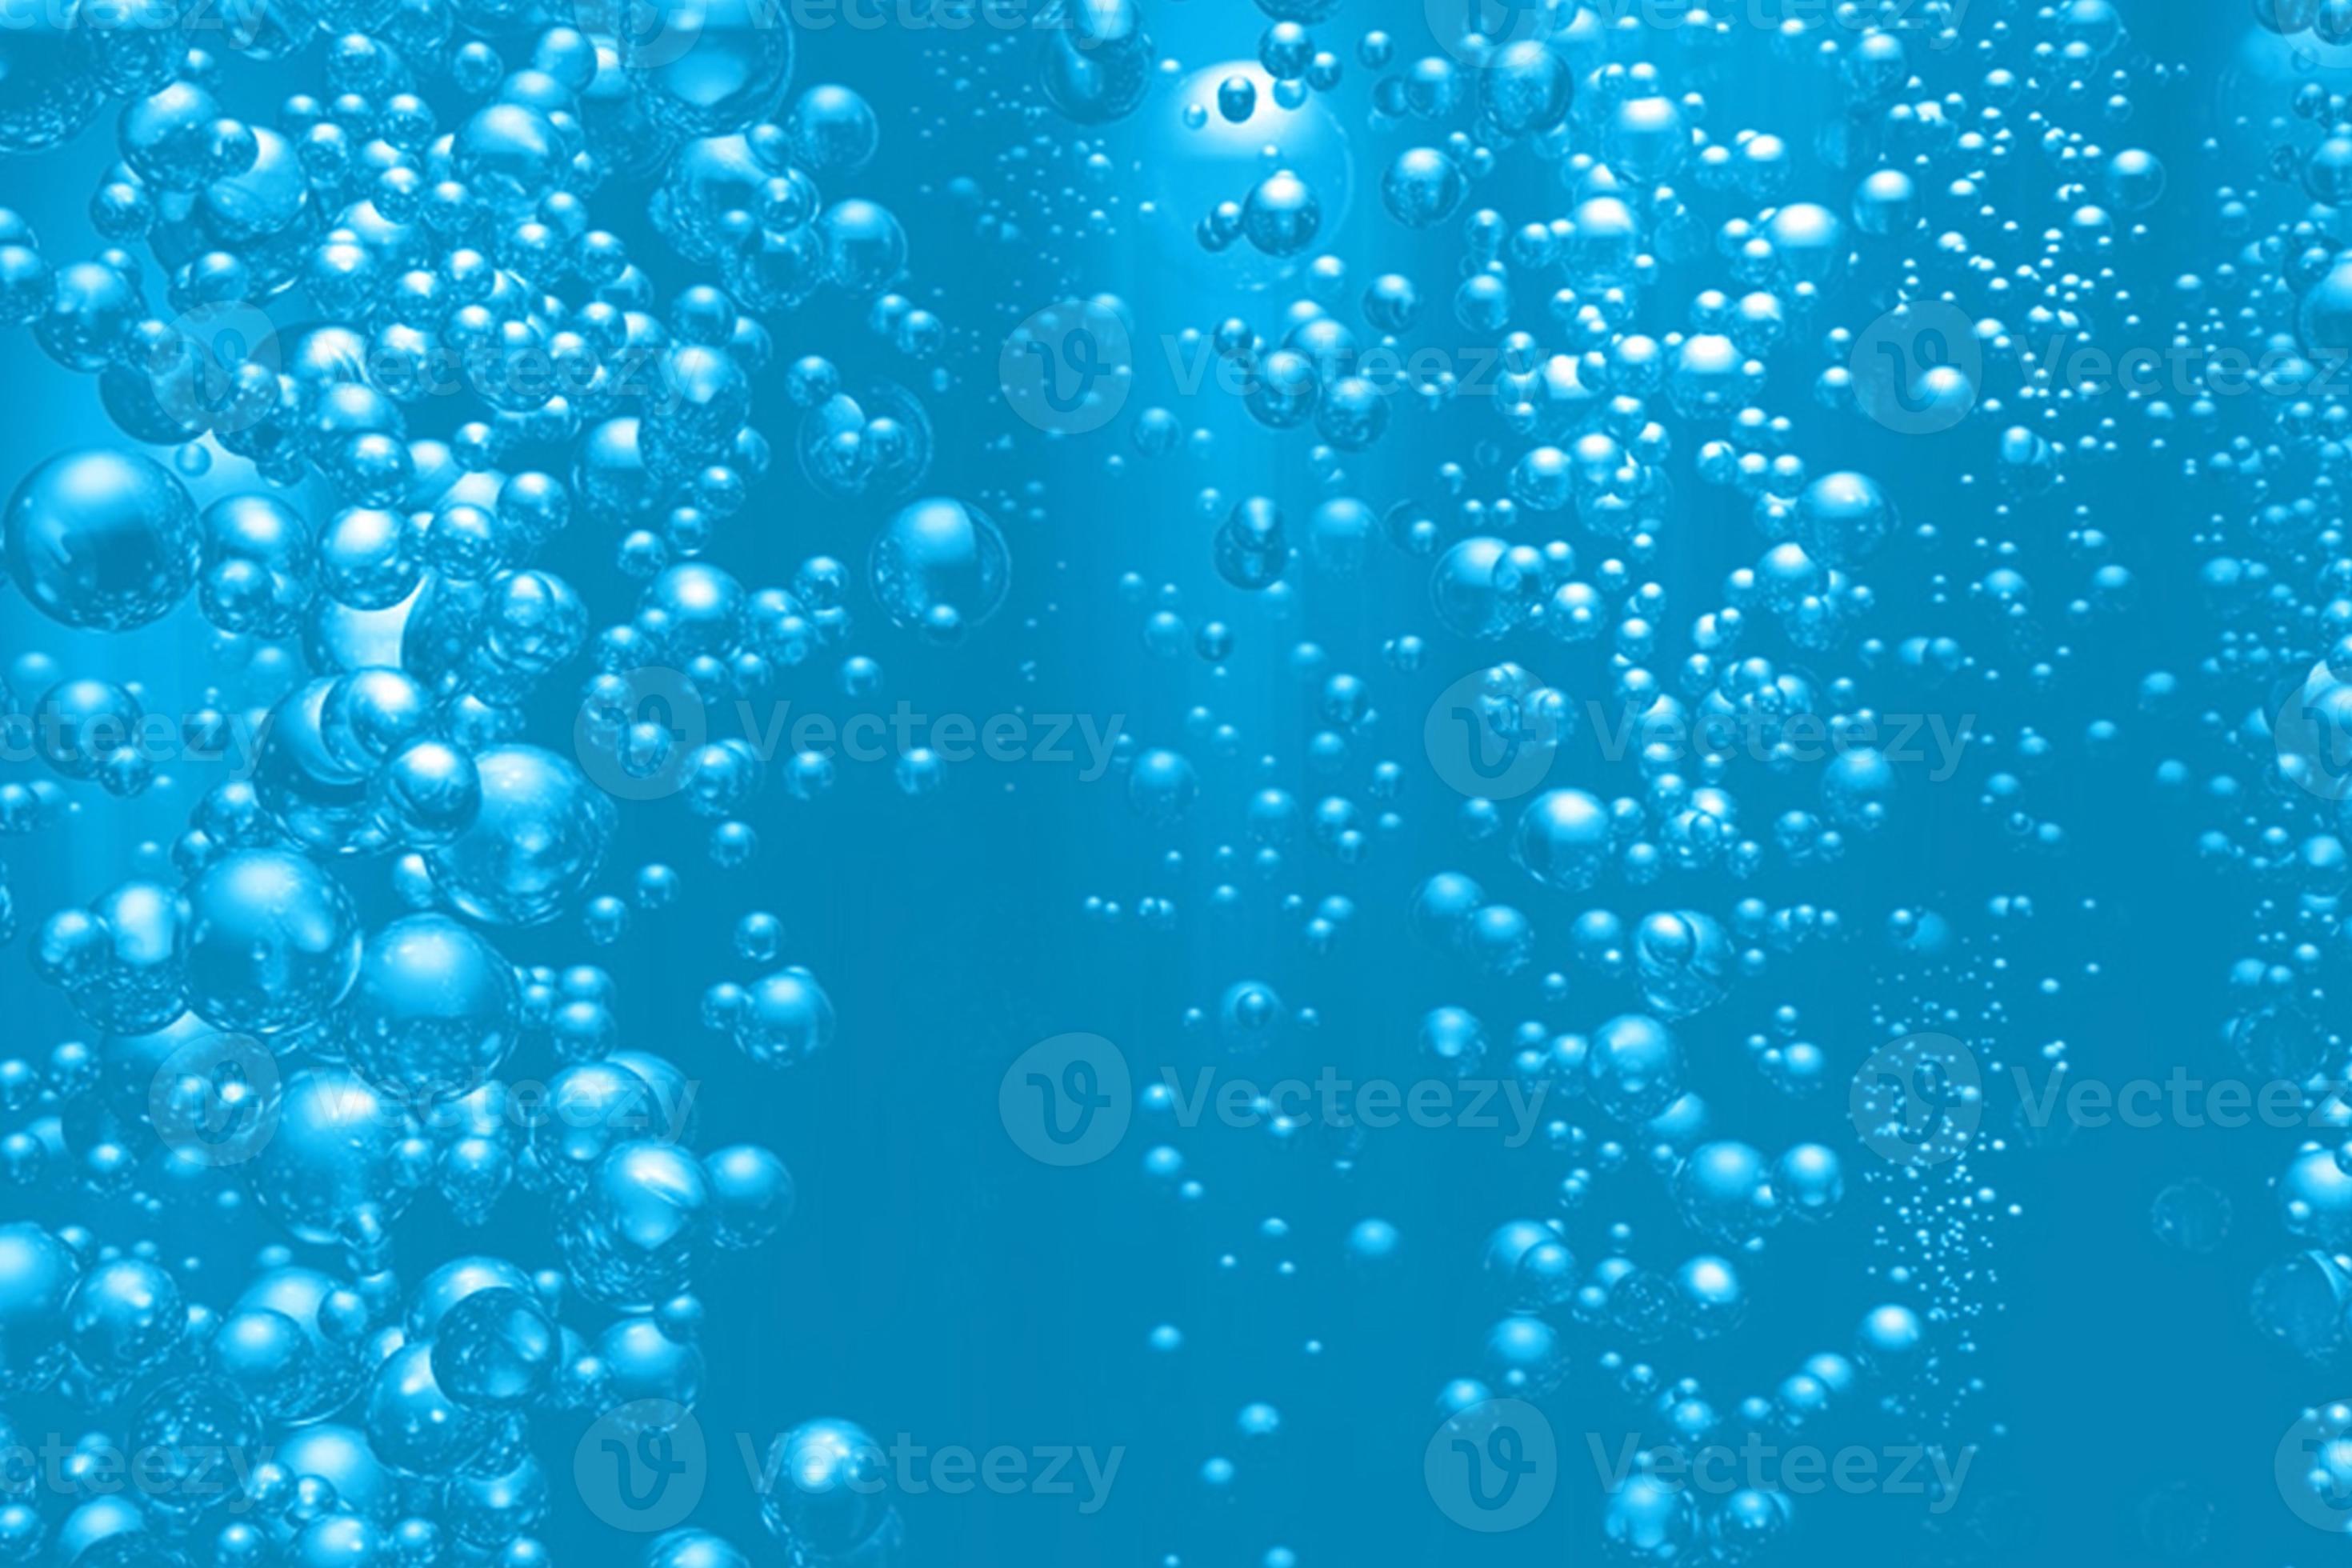 Defocus blurred transparent blue colored clear calm water surface